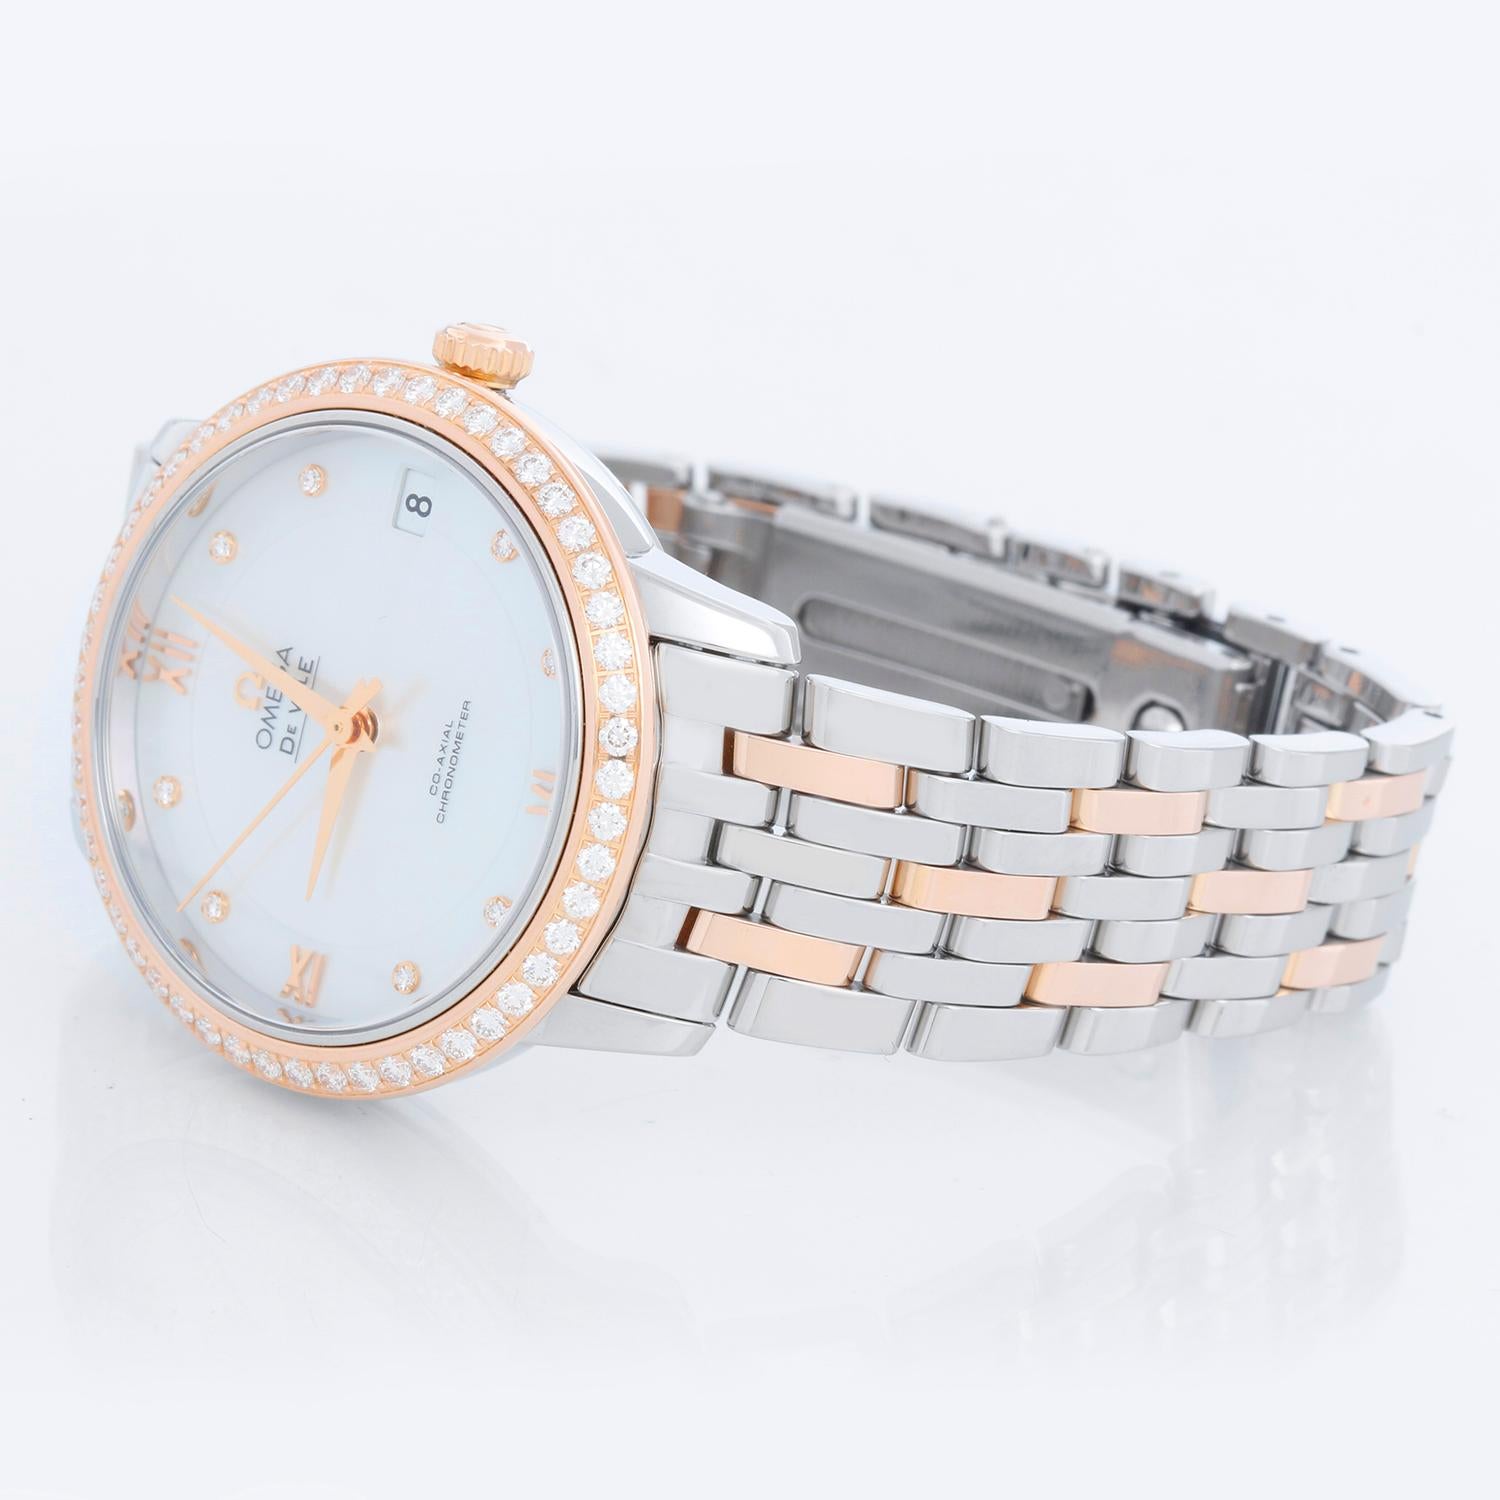 Omega De Ville Rose Gold & Stainless Steel  Women's Watch 424.25.33.20.55.002 - Automatic winding, sapphire crystal. Rose Gold & Stainless Steel Case (33mm) with factory diamond bezel. Factory Mother of Pearl dial with diamond hour markers. Rose